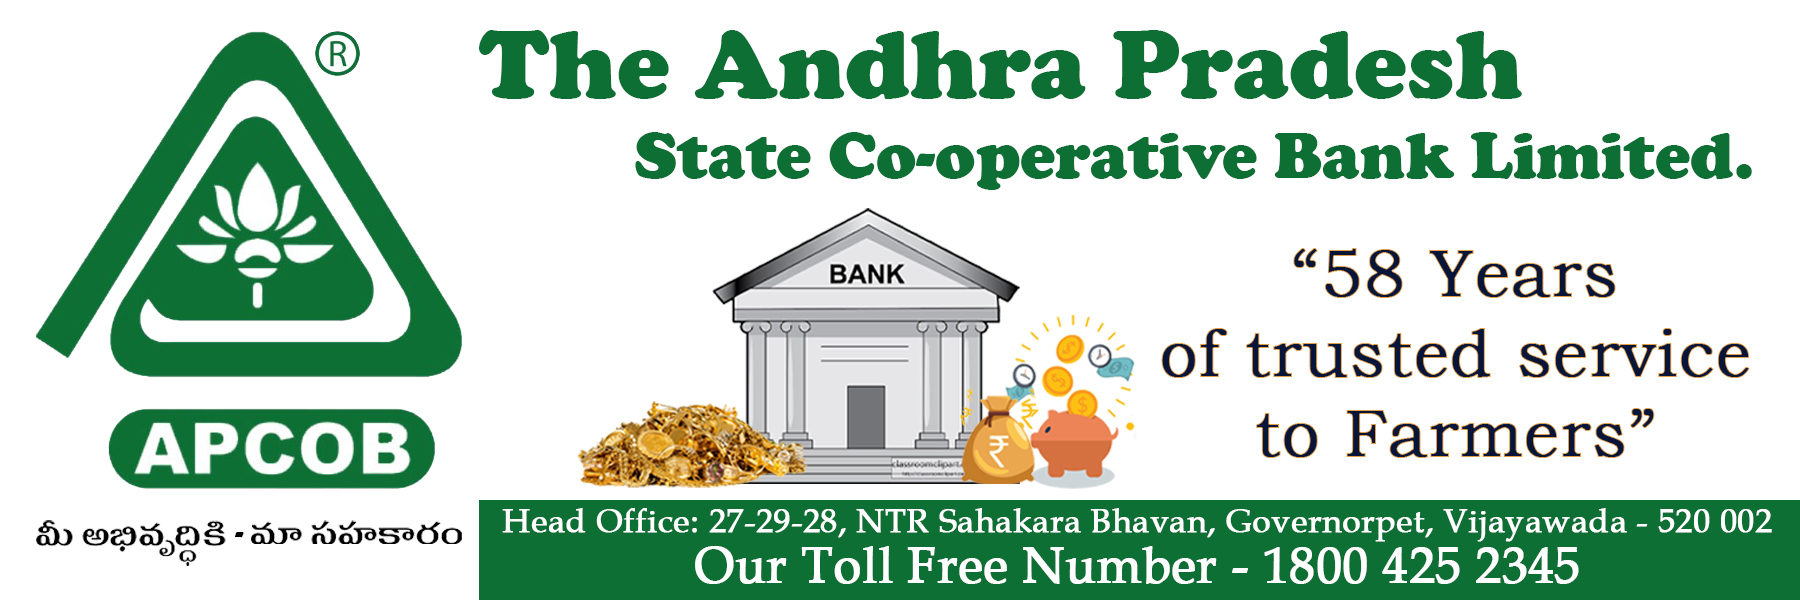 The Andhra Pradesh State Co-Operative Bank Limited